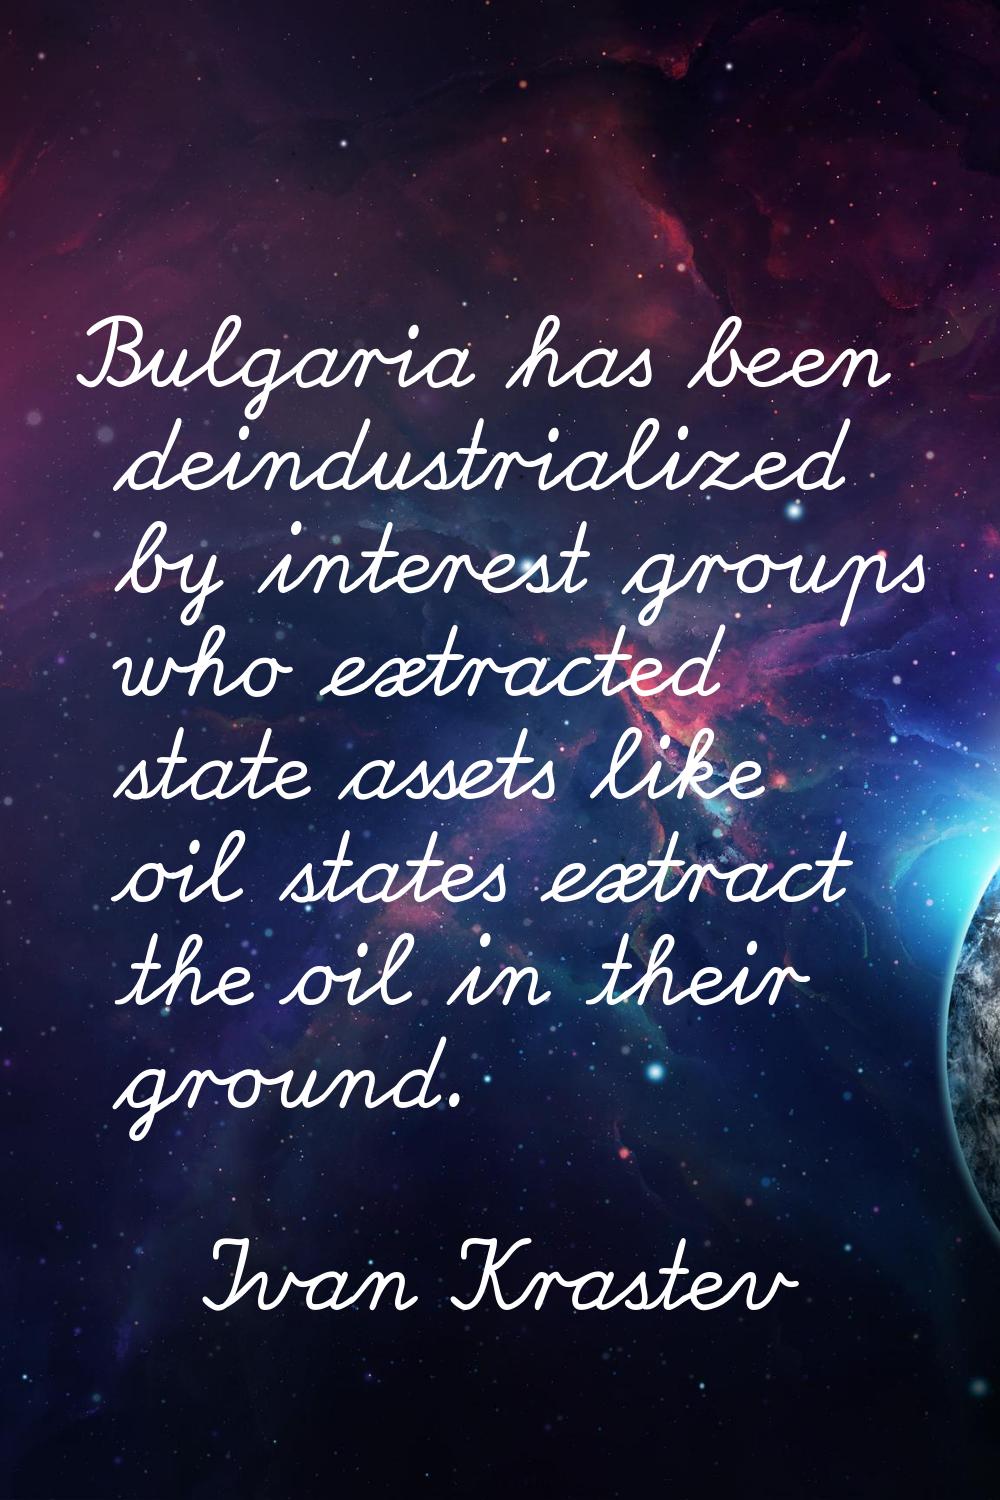 Bulgaria has been deindustrialized by interest groups who extracted state assets like oil states ex